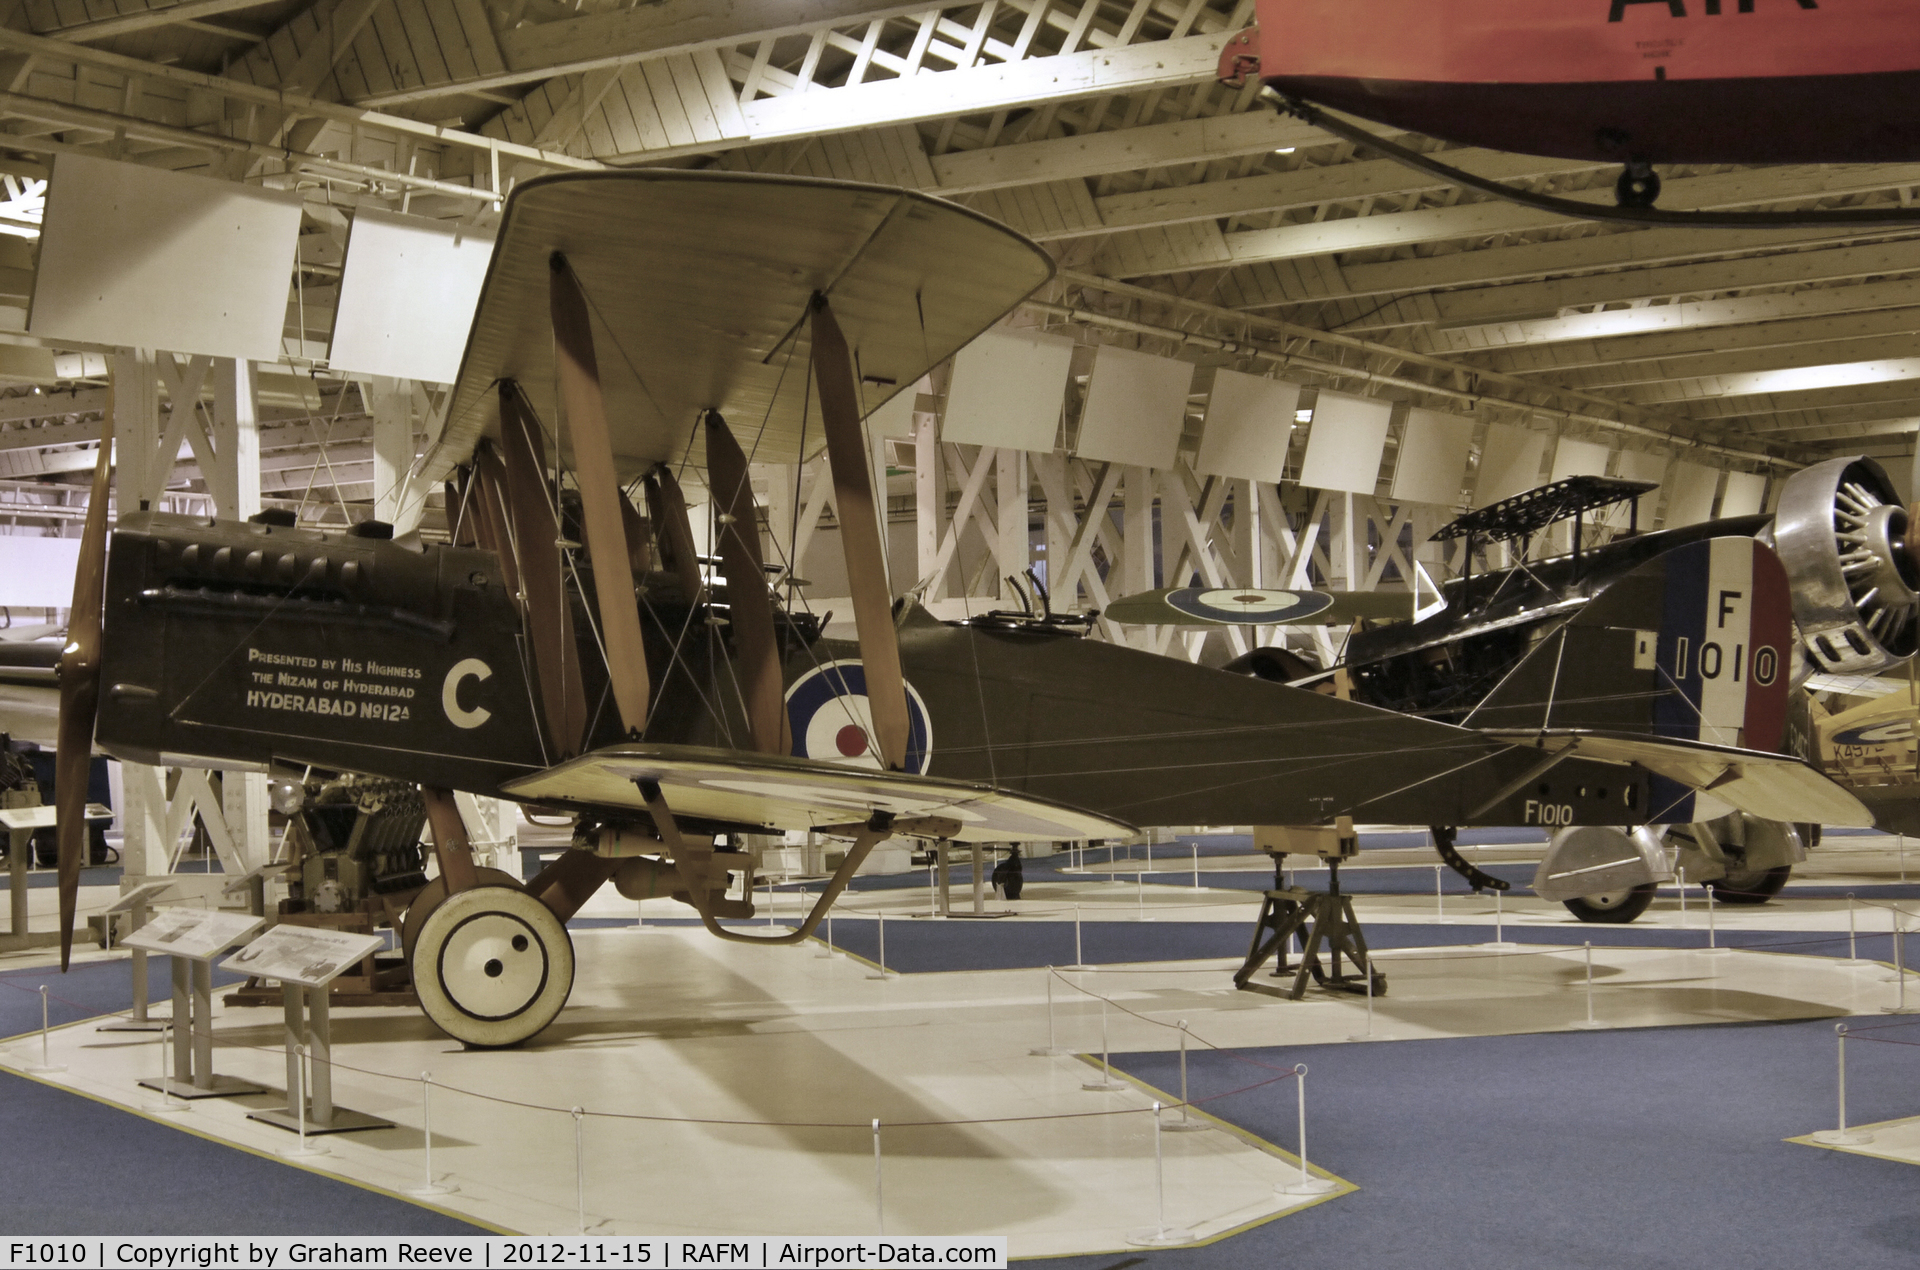 F1010, De Havilland DH-9A C/N WA8459AMA, On display at the Royal Air Force Museum, Hendon.